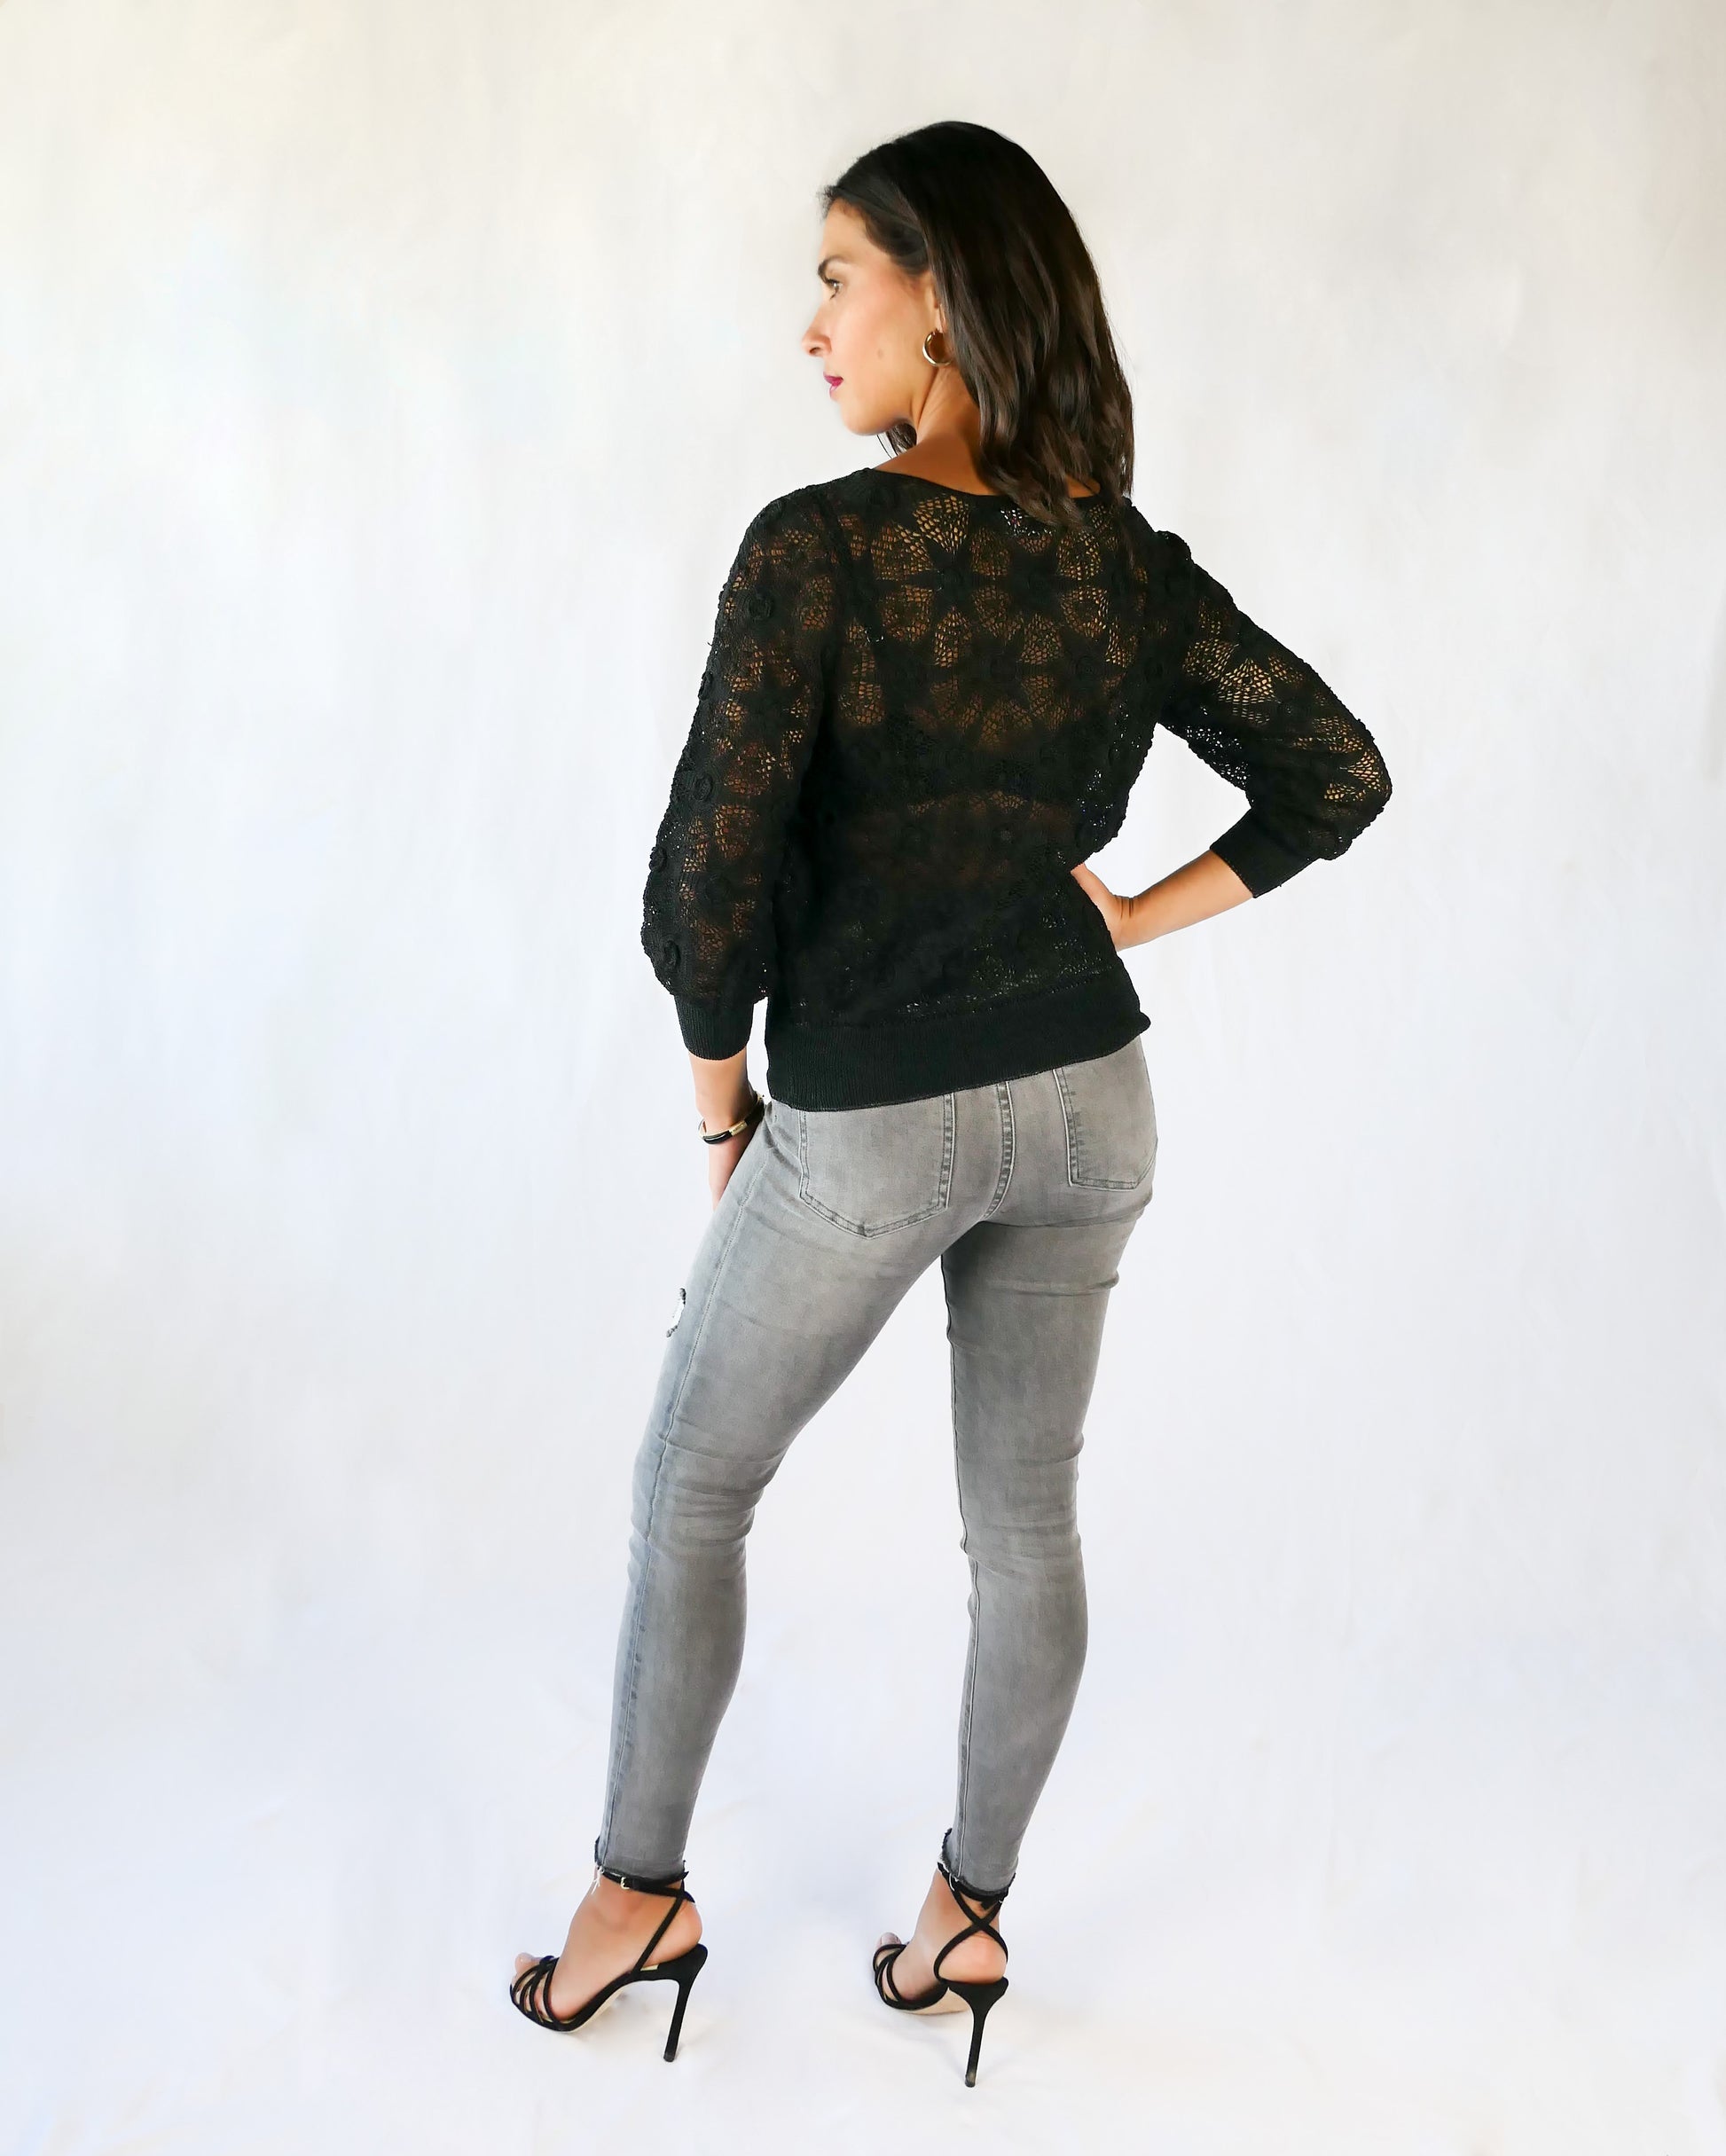 Back view. Your everyday fitted sweater with a twist. A Lim's Vintage original hand crocheted crewneck sweater in basic black with star shaped flowers and elastic banding at the hip and wrists.